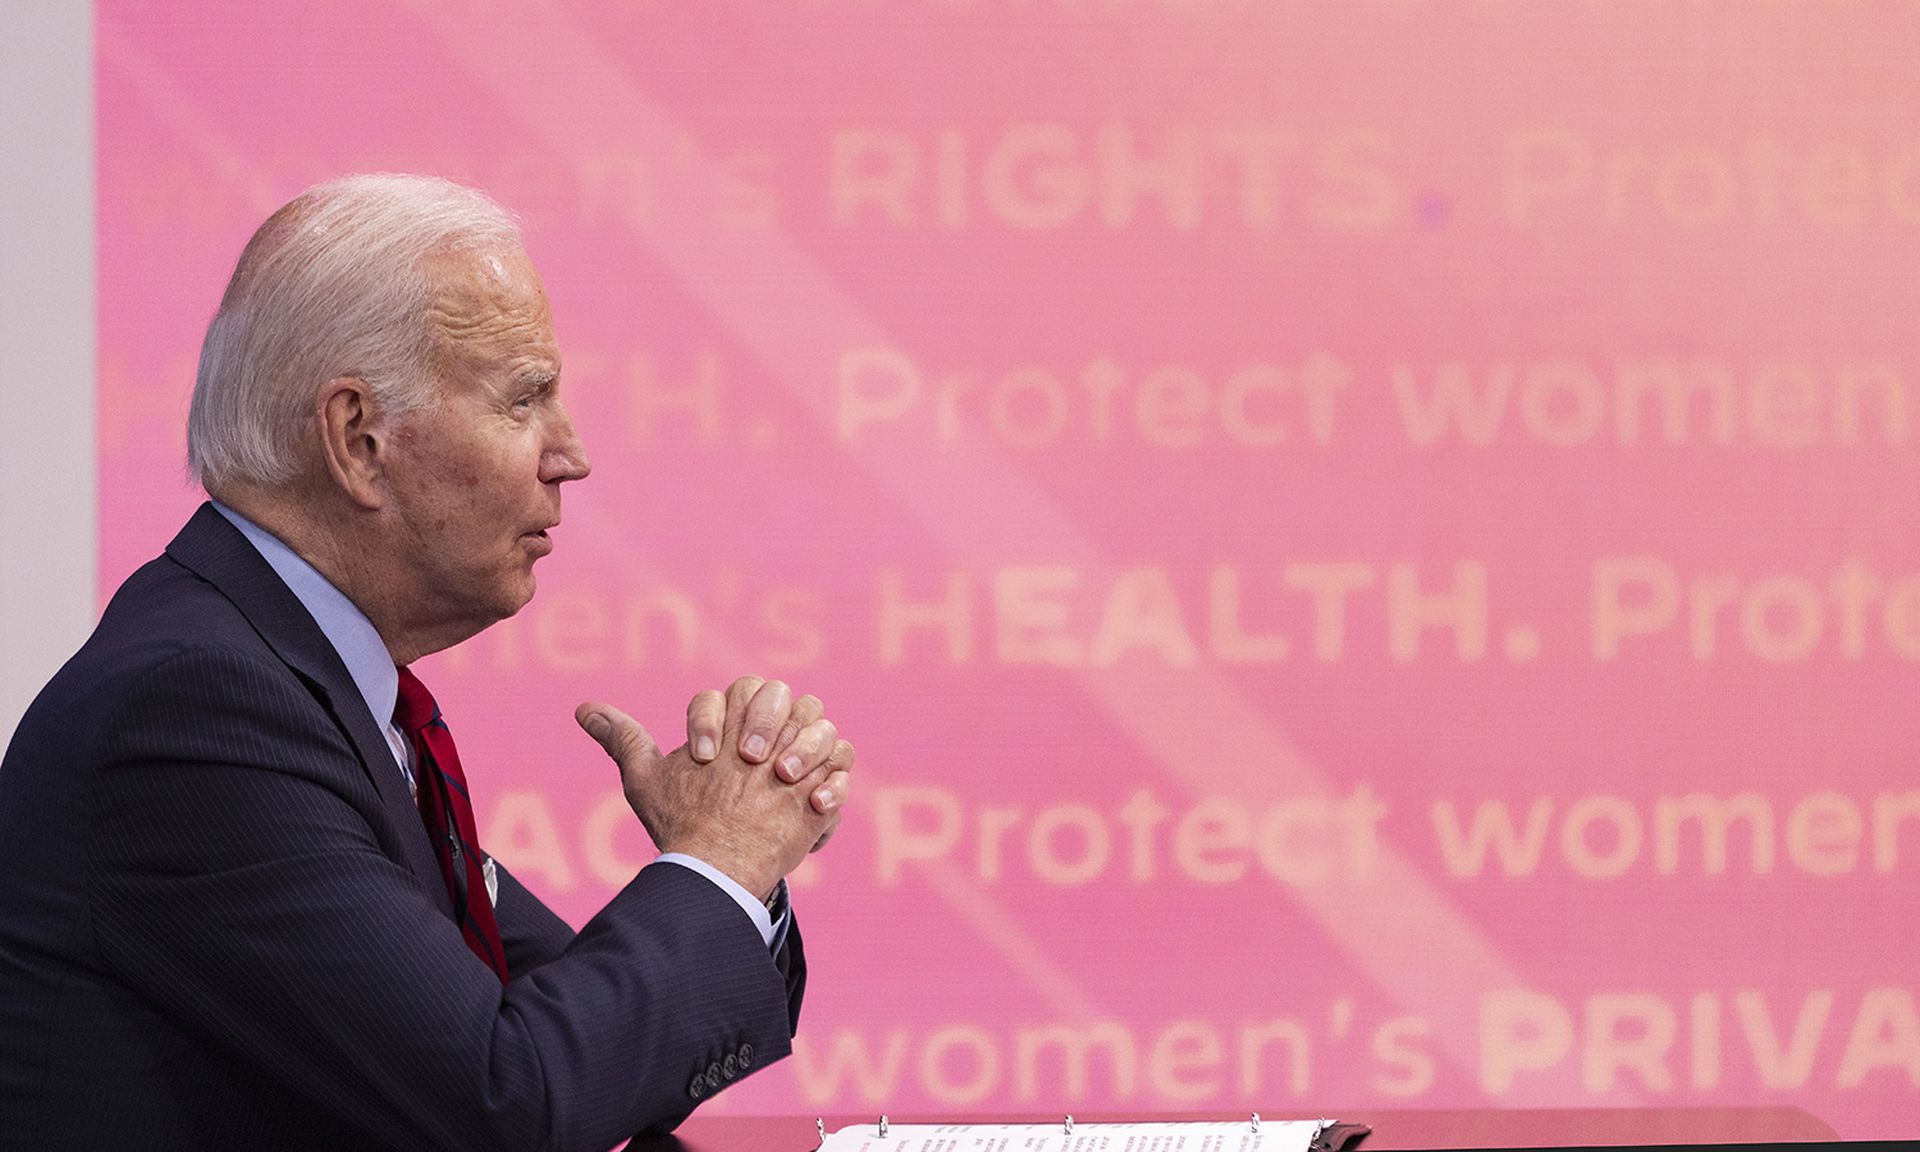 President Joe Biden speaks with governors on protecting access to reproductive healthcare at the White House on July 1 in Washington. Biden signed an executive order Friday to protect access to reproductive healthcare servces. (Photo by Tasos Katopodis/Getty Images)